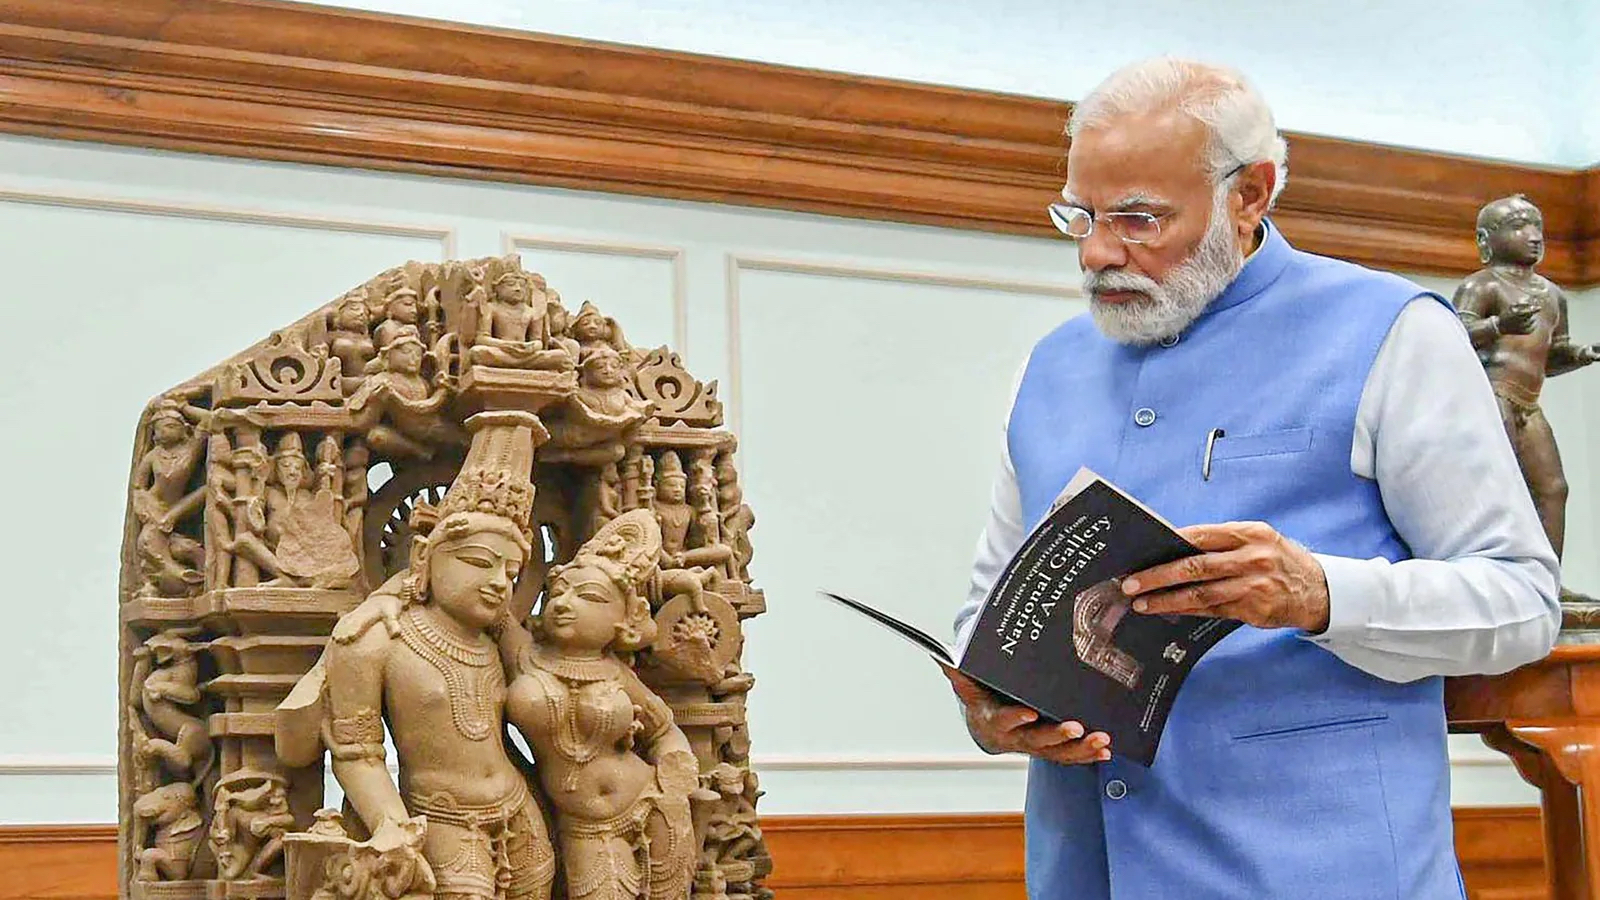 Indian Prime Minister Narendra Modi inspects a sculpture, while holding a catalogue